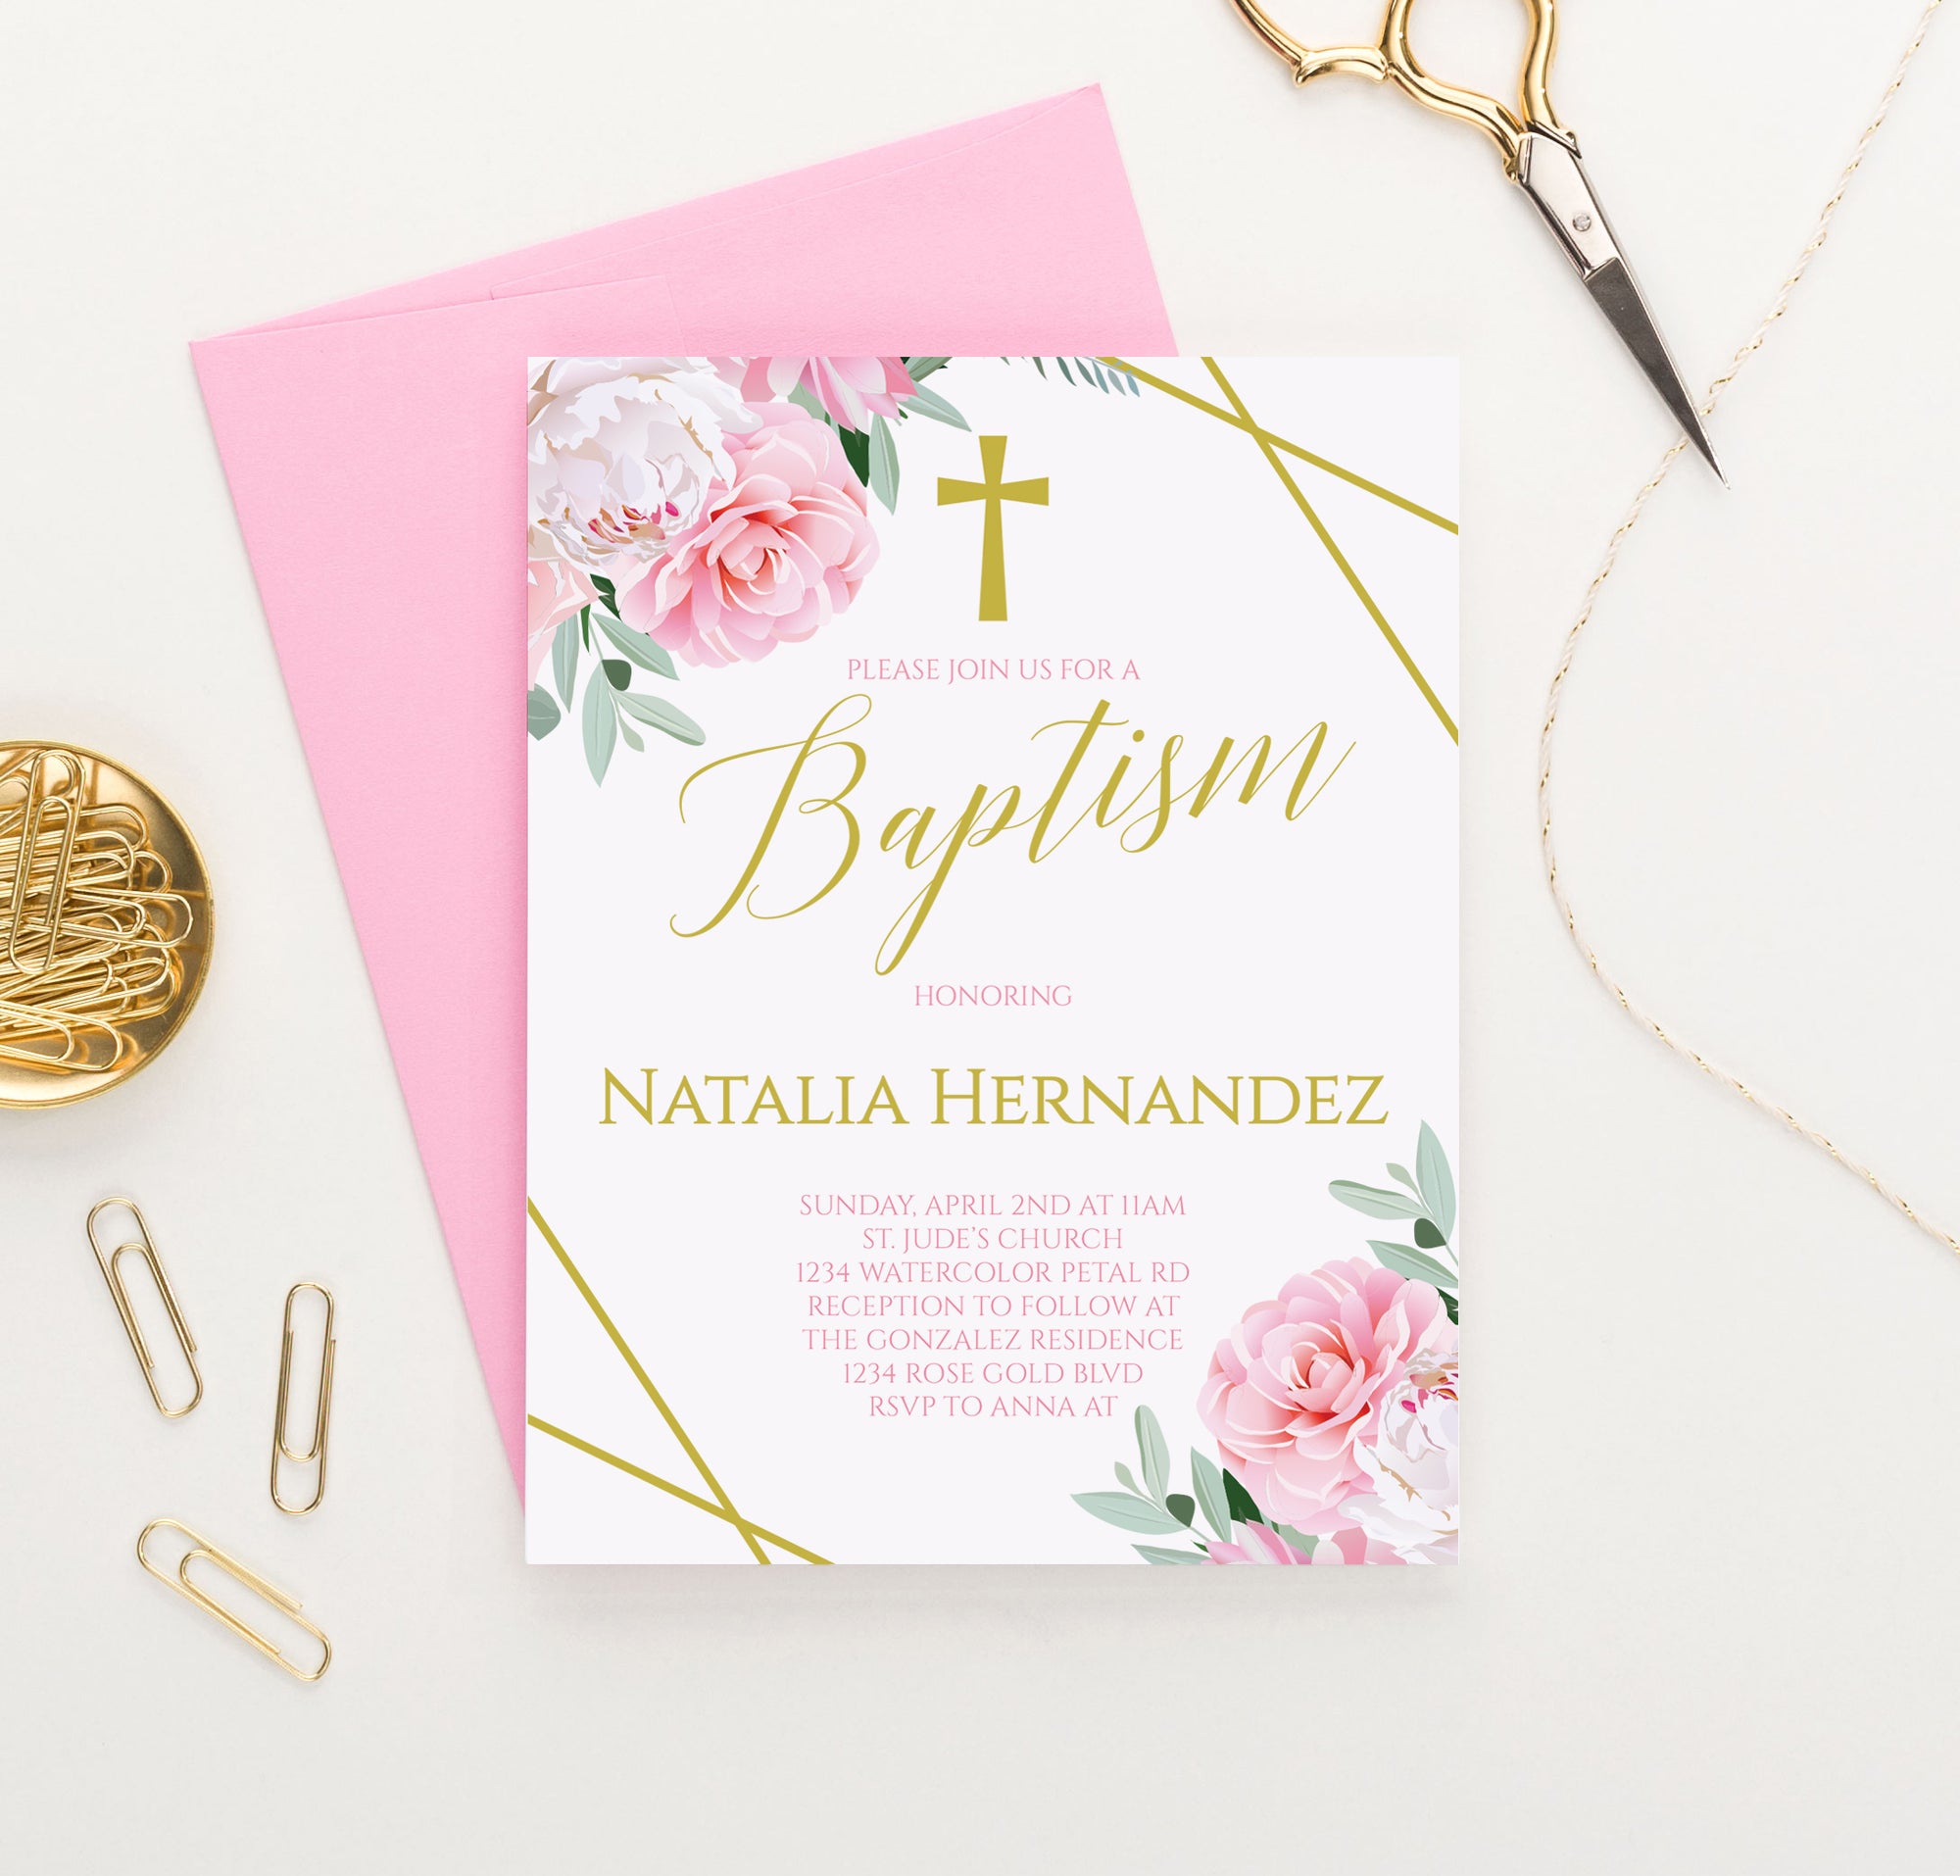 Personalized Pink And Gold Baptism Invites With Floral Corners